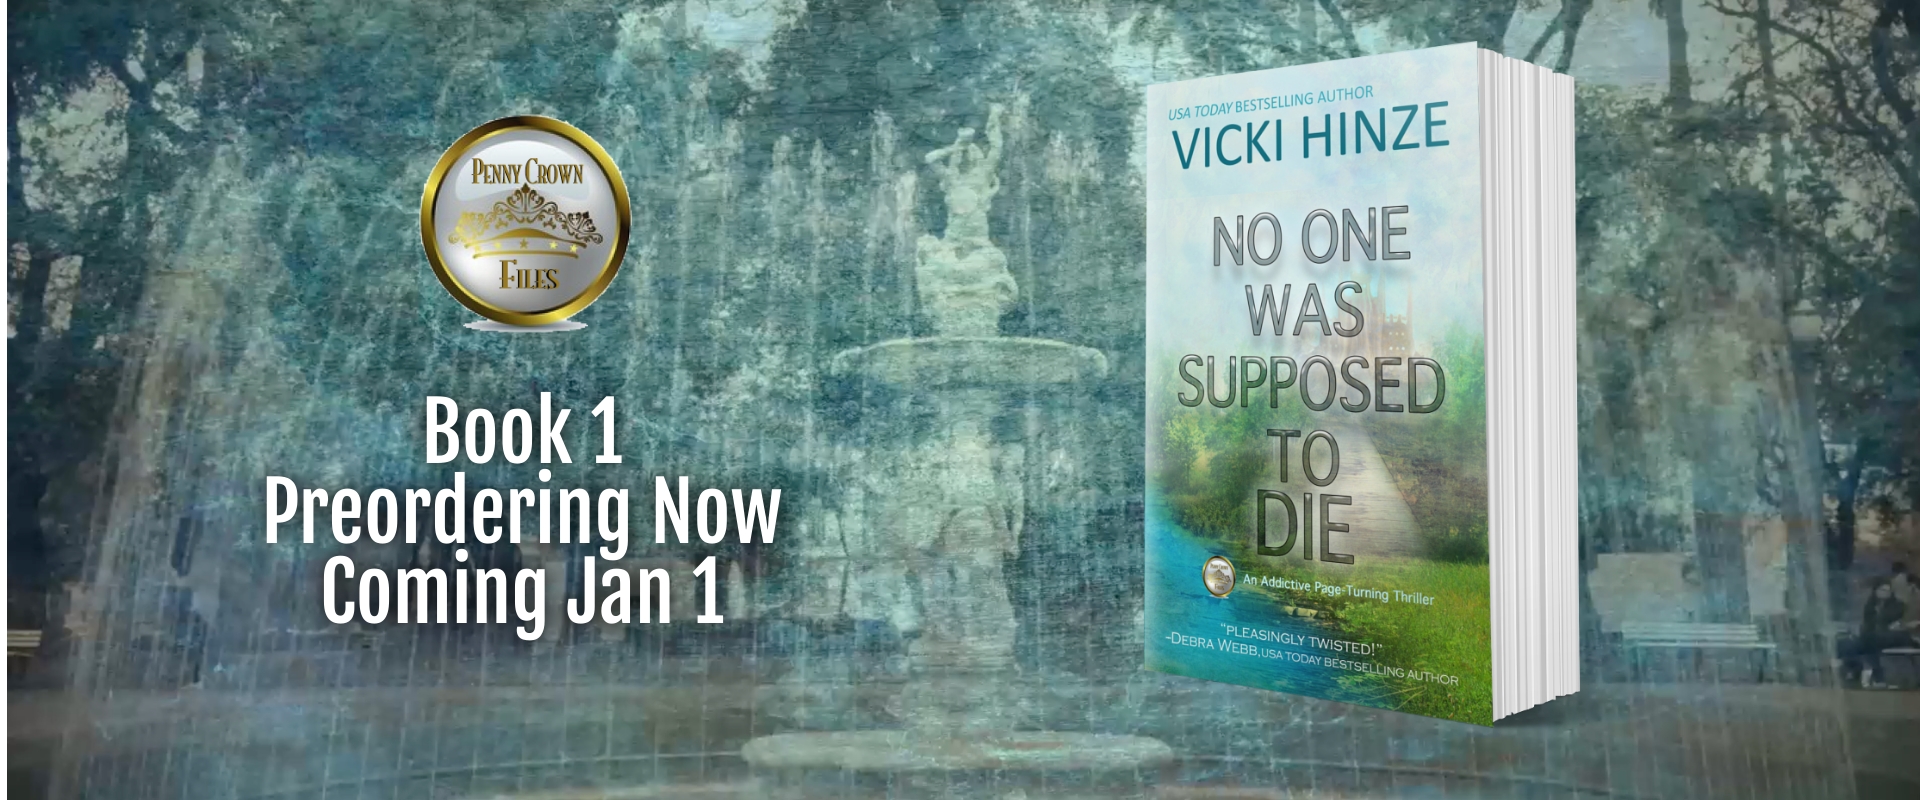 Vicki Hinze, No One Was Supposed to Die